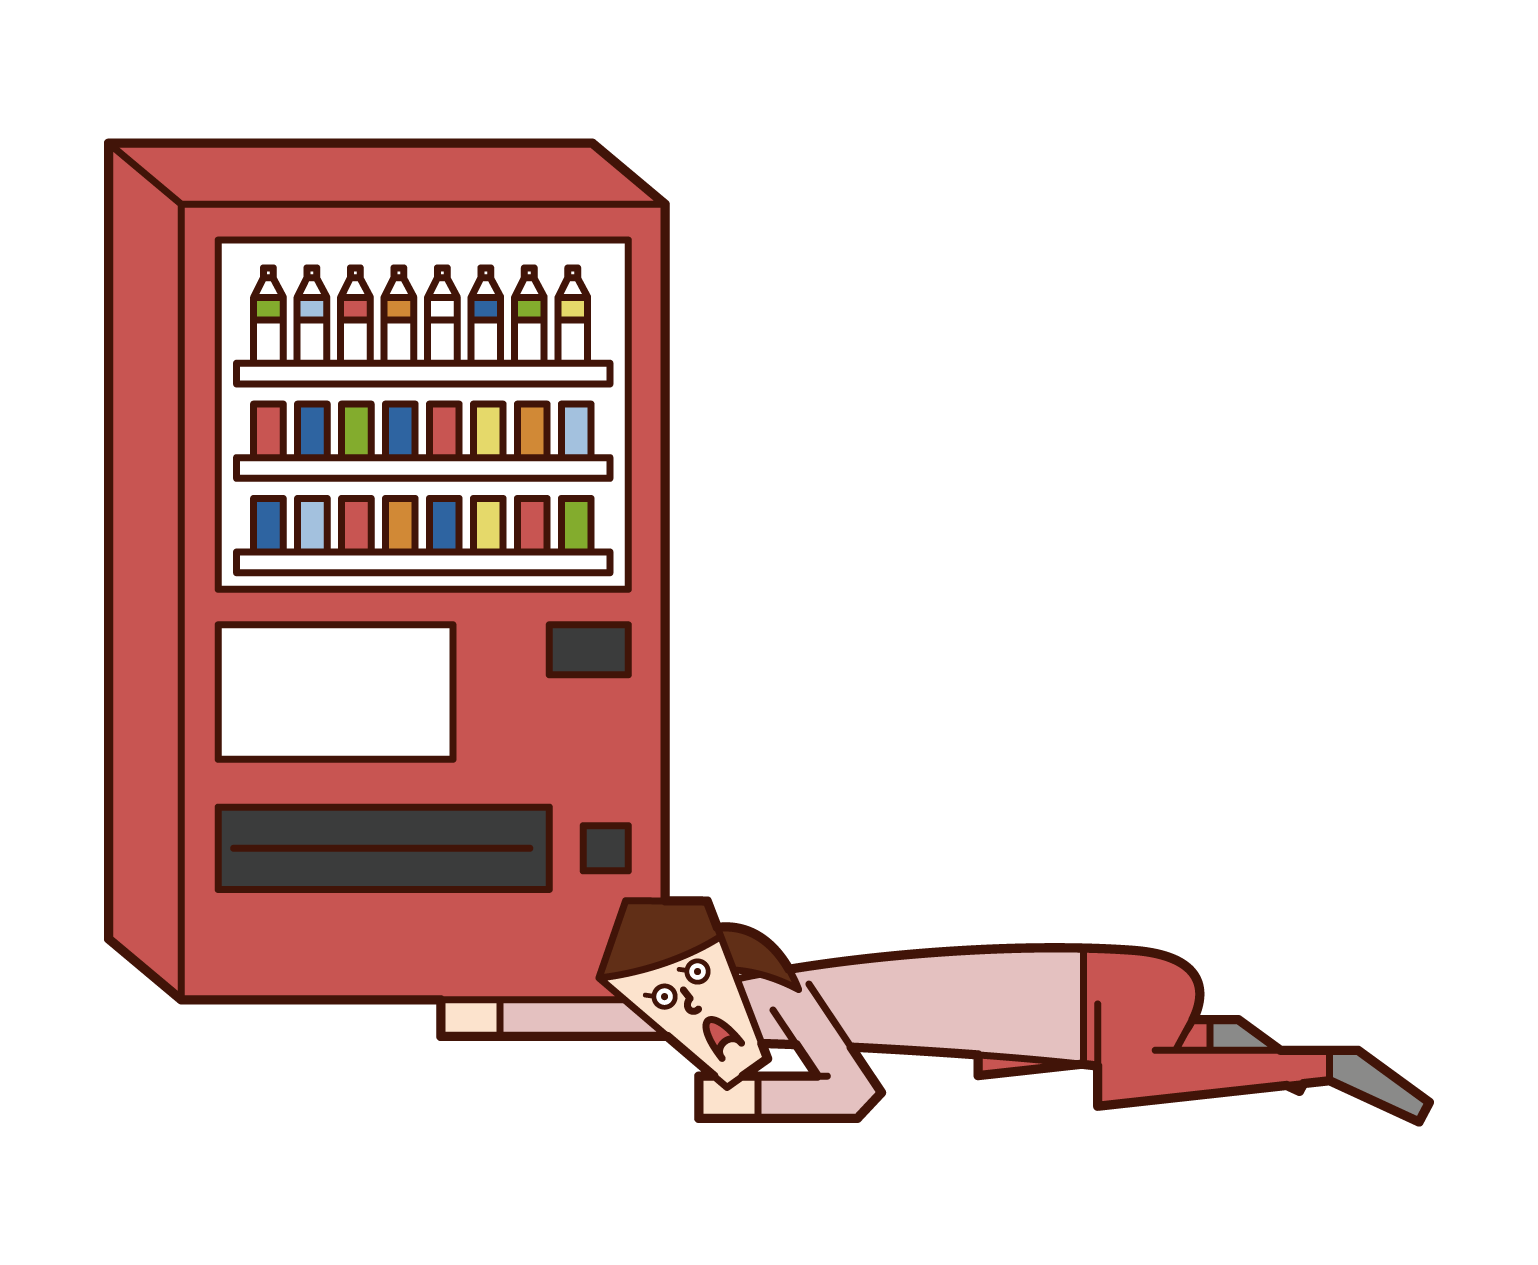 Illustration of a man buying a drink from a vending machine